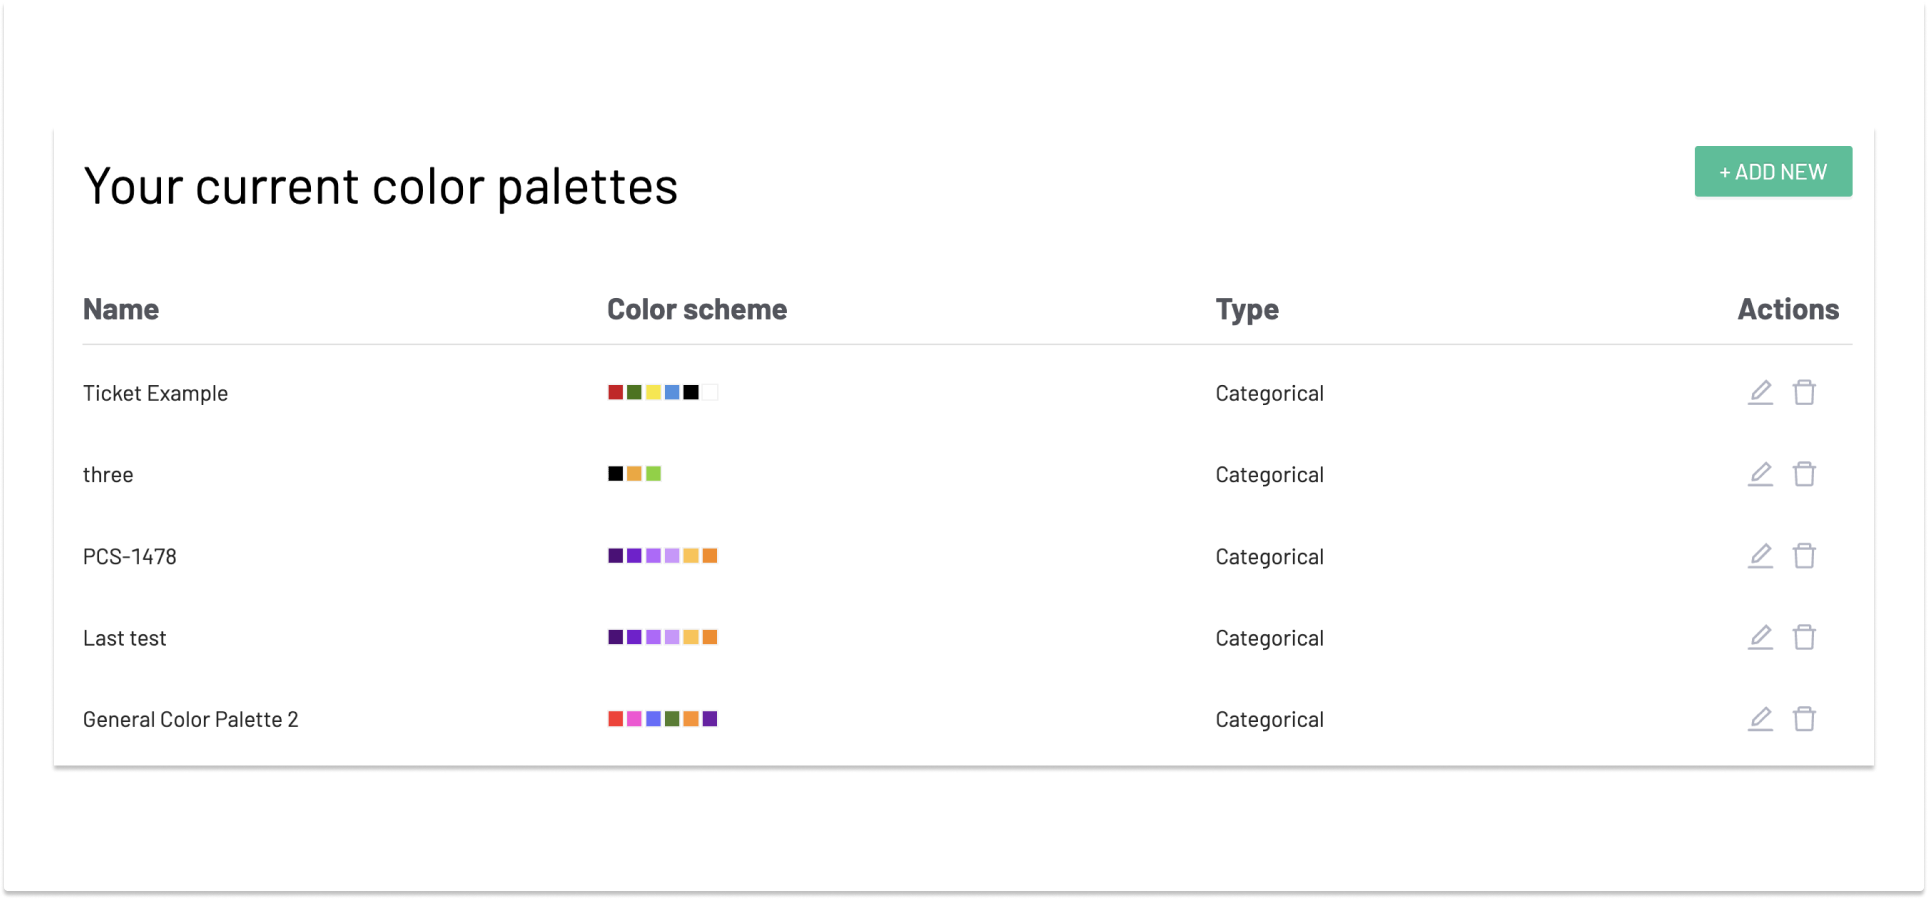 Current color palettes and edit/delete actions